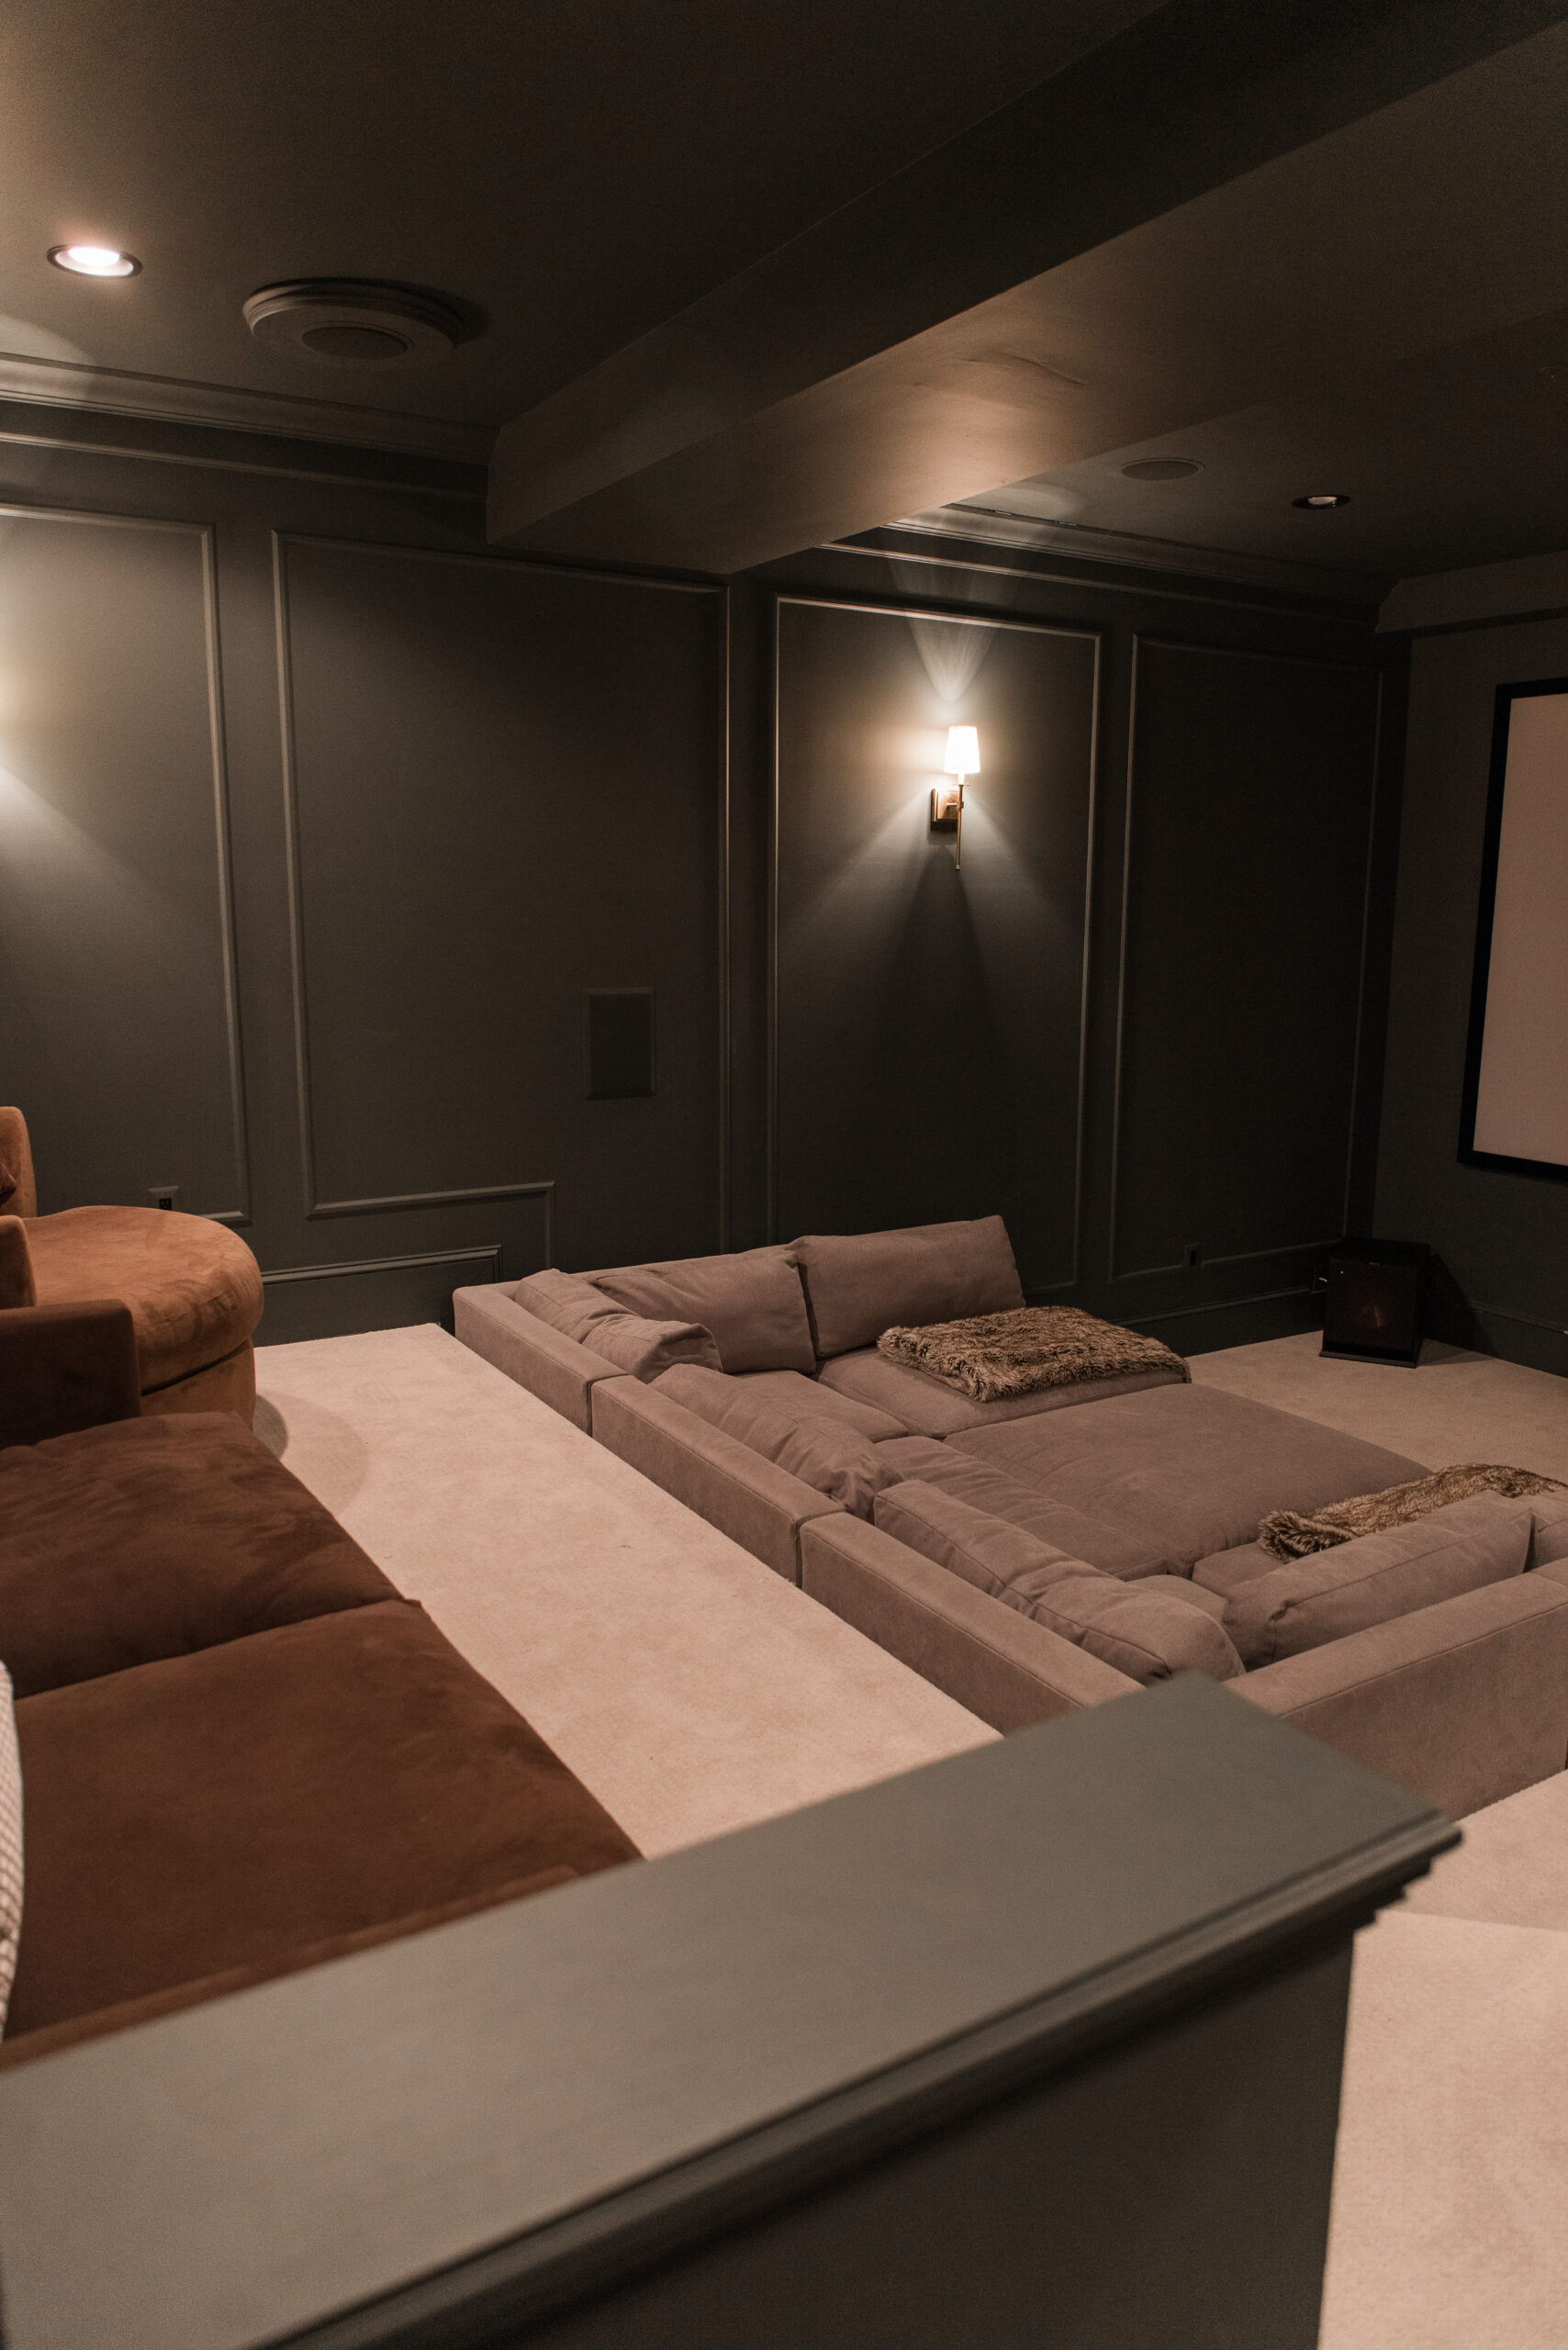 home theater seating, home, home theater, home theater seating, pit sofa, blanket, popcorn, chair, pillows, throw pillows, home decor, home blog, home blogger, home styling. home theater accessories, accessories & essentials, sofas